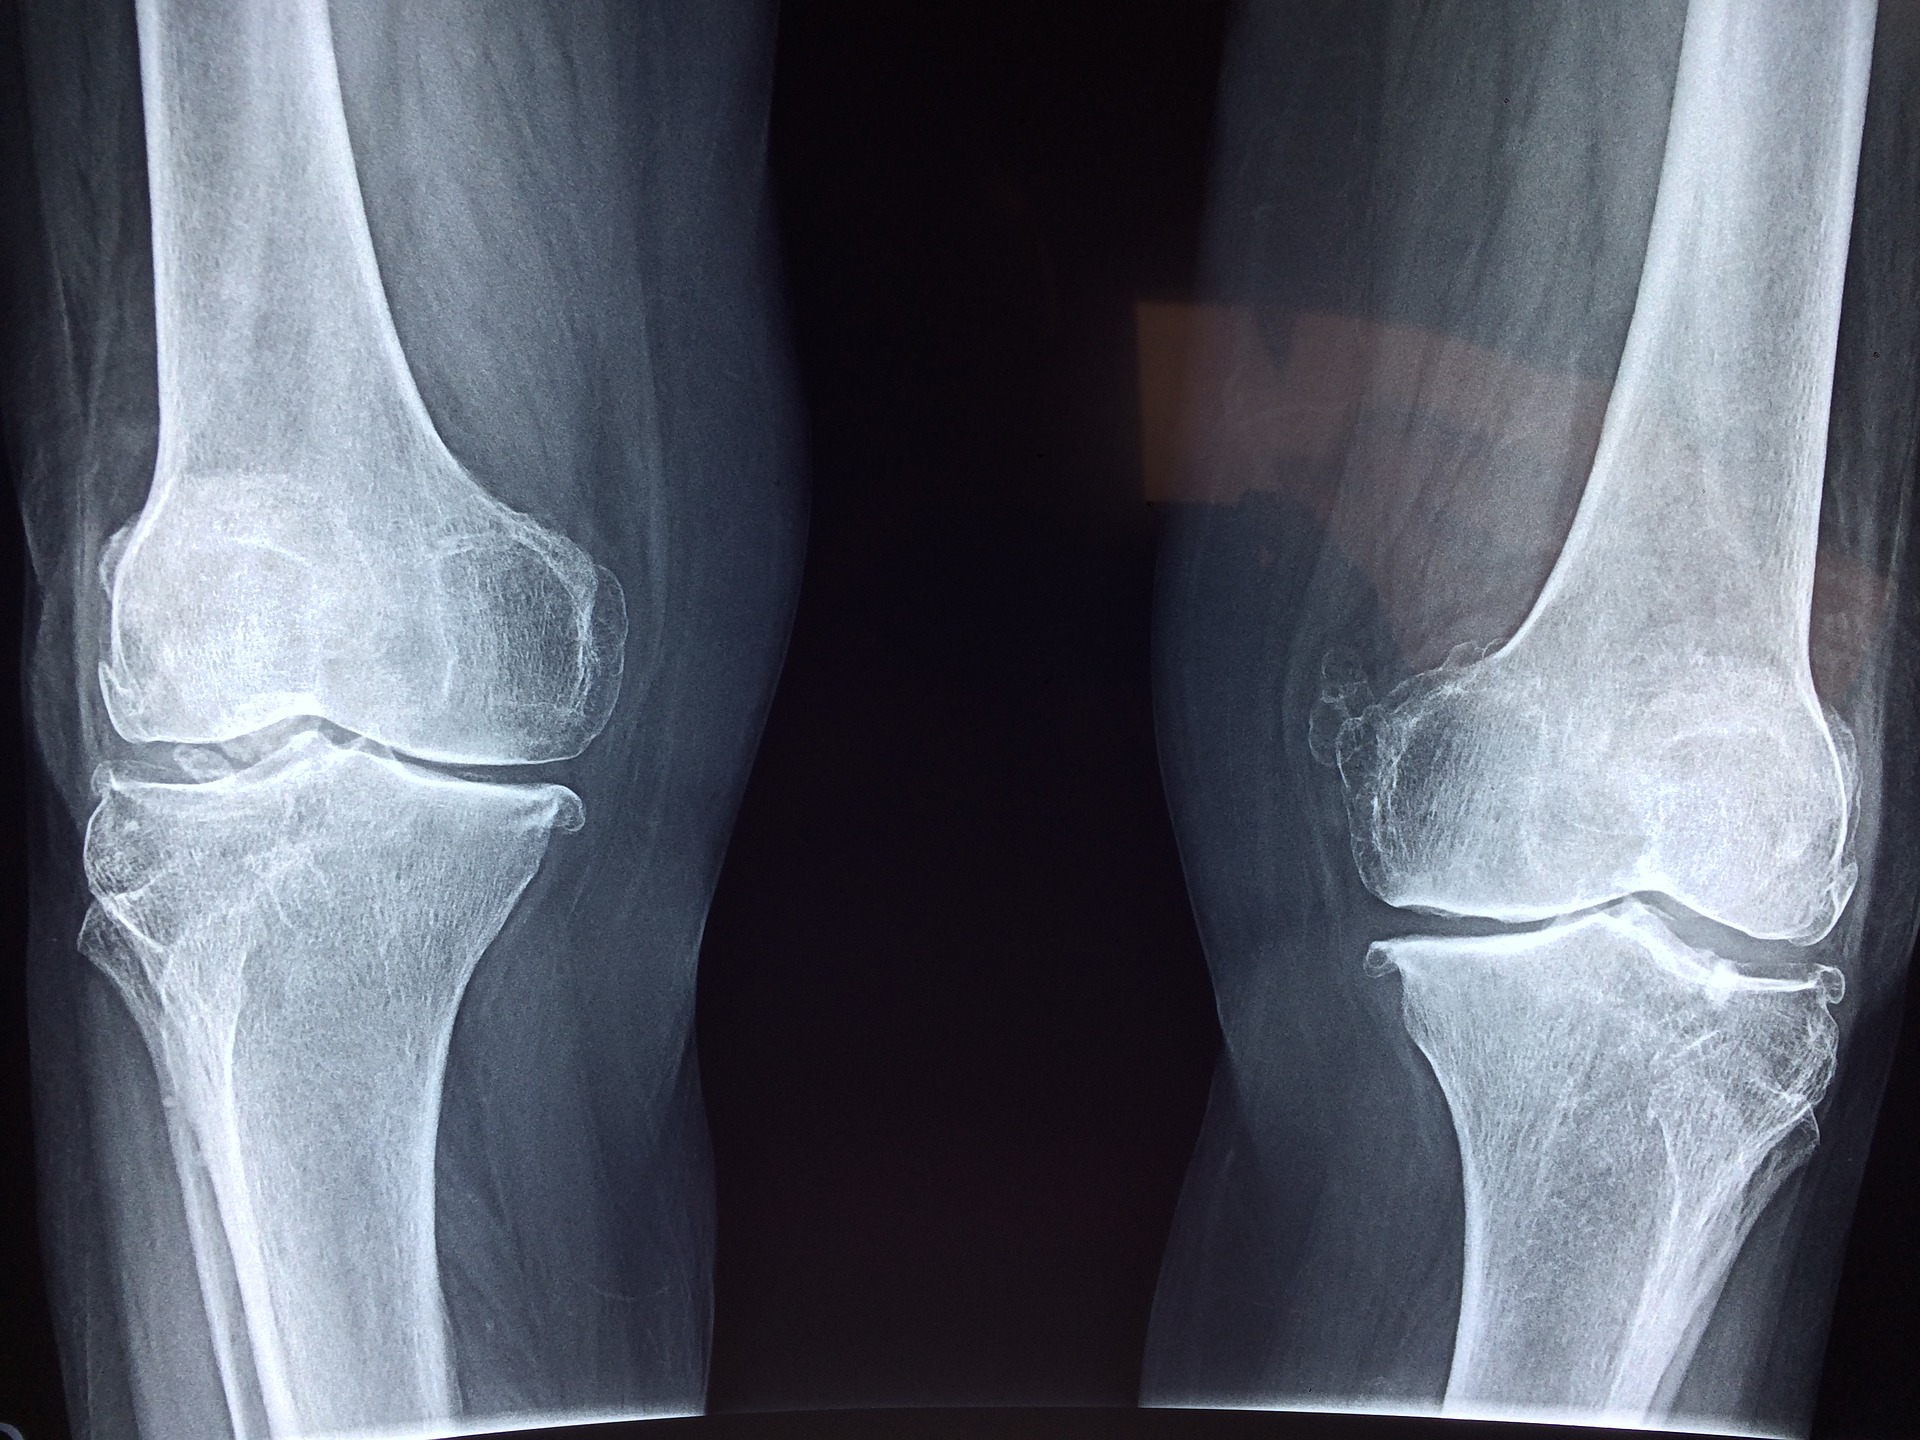 Getting SSD Benefits with Degenerative Joint Disease